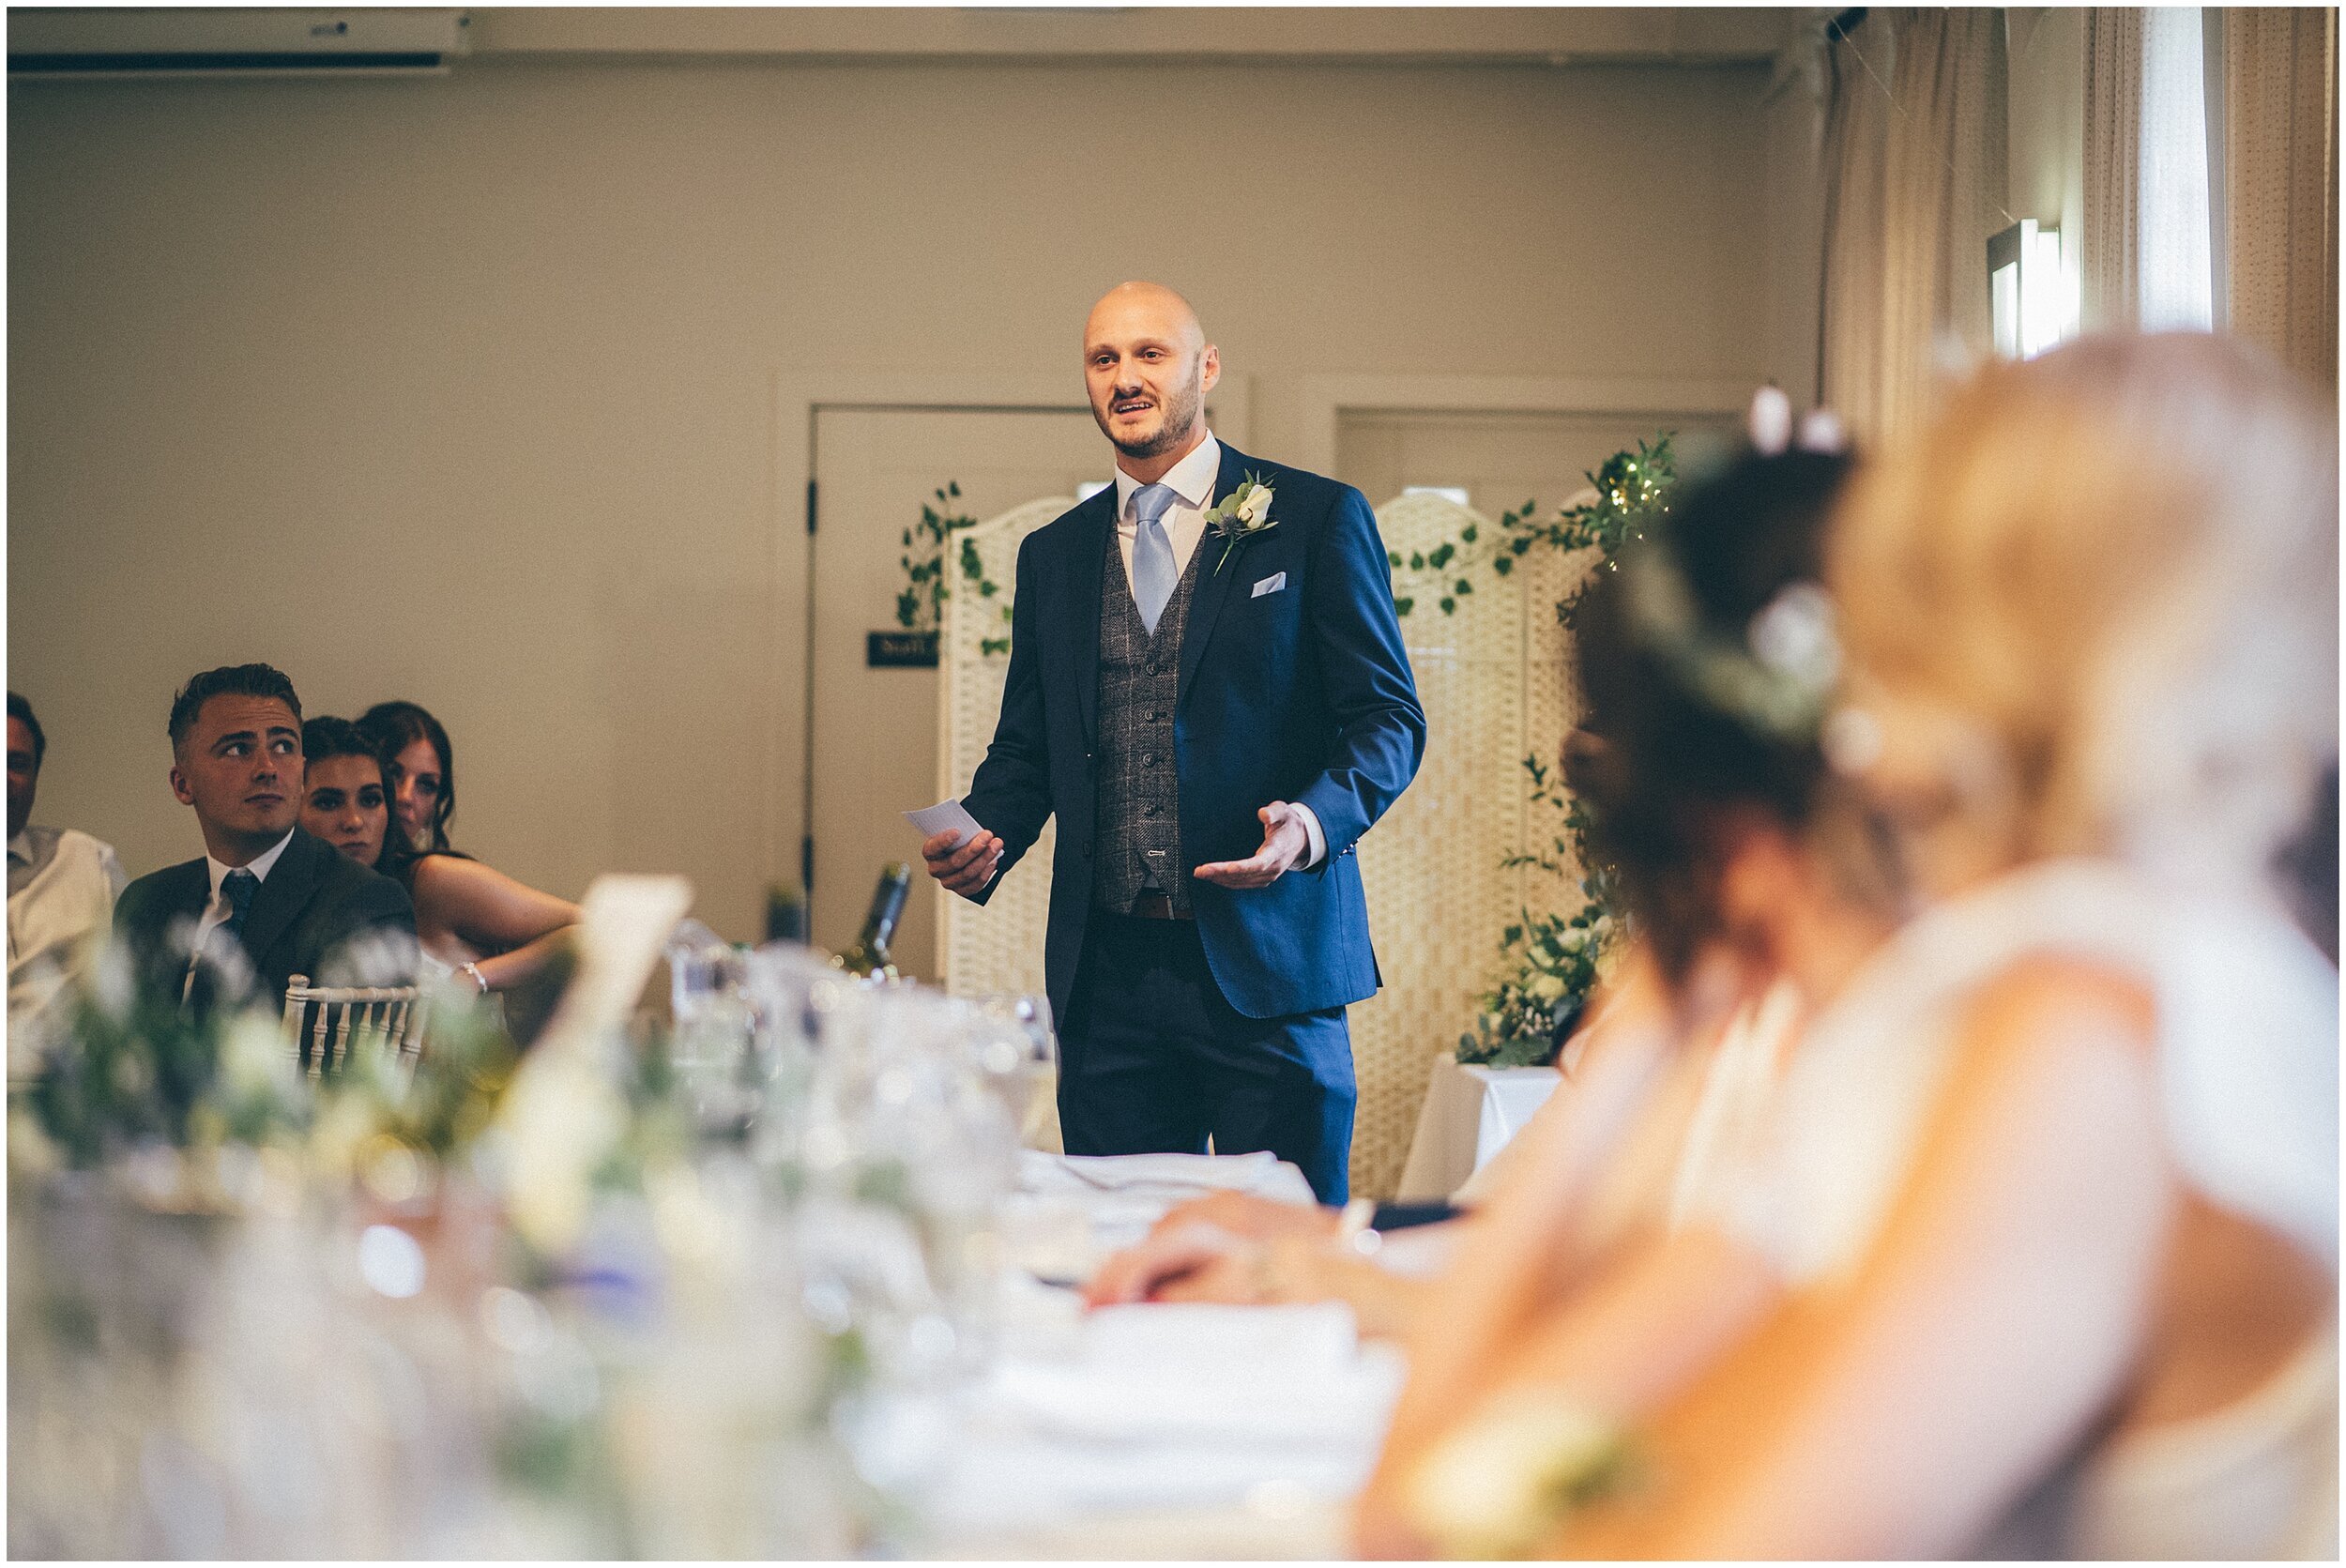 Best Man speech at Quarry Bank Mill wedding in Cheshire near to Manchester.